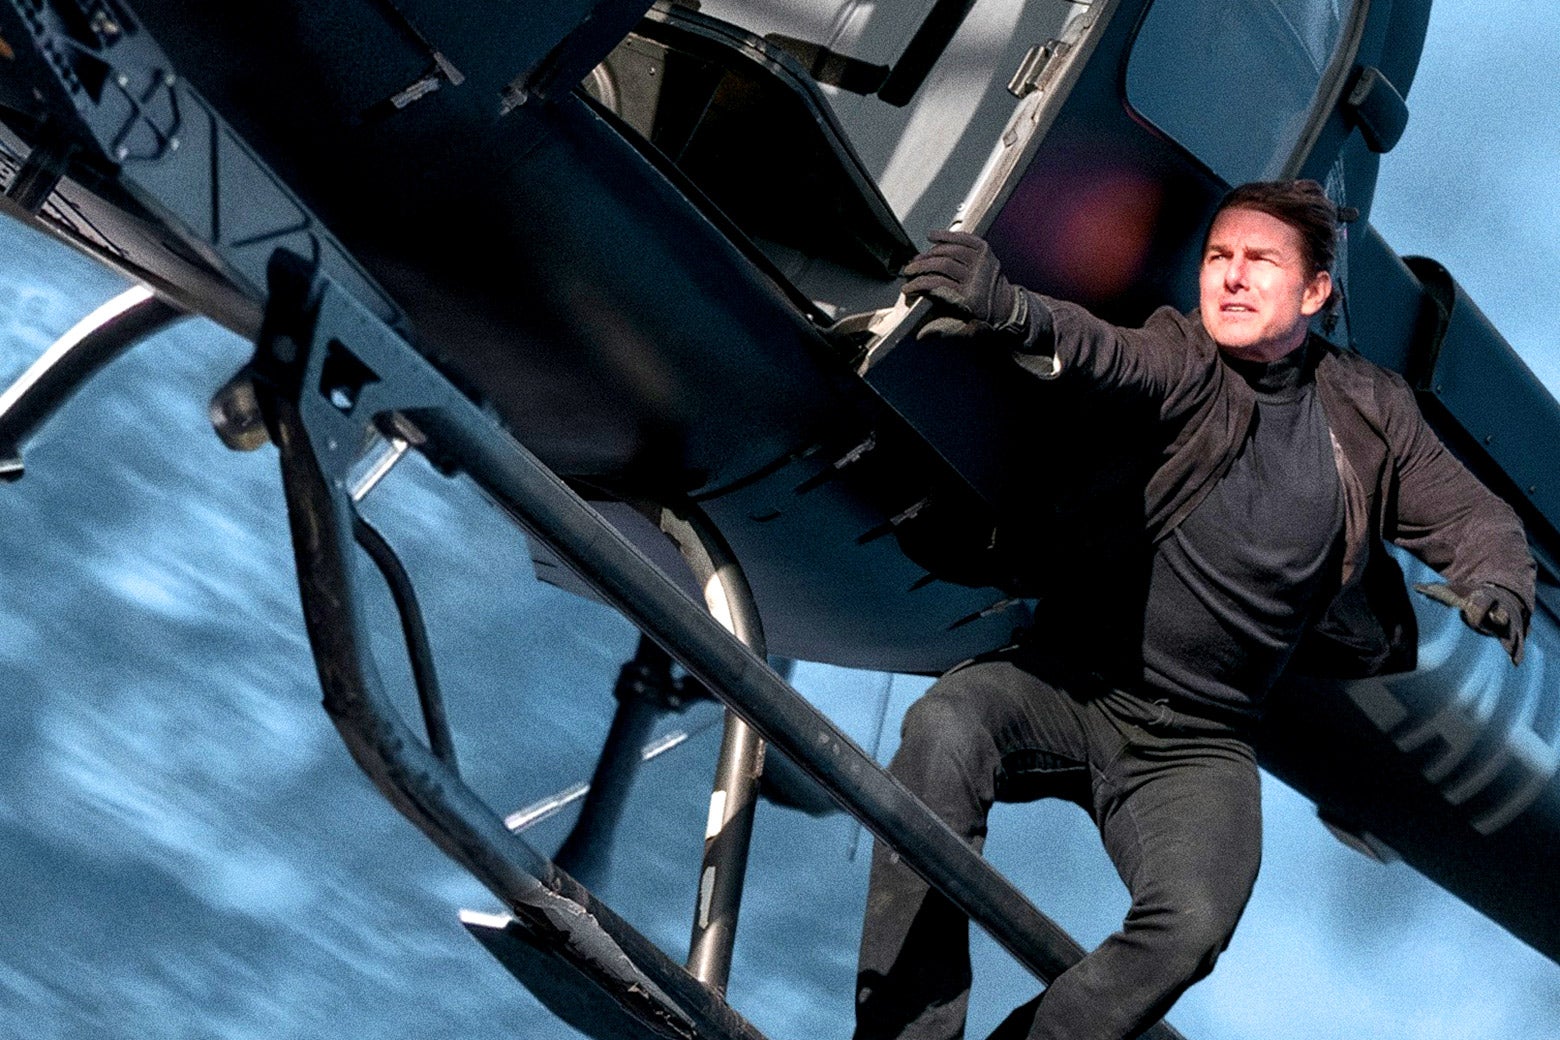 Tom Cruise attempting to hold fast to the outside of a helicopter in Mission: Impossible - Fallout.